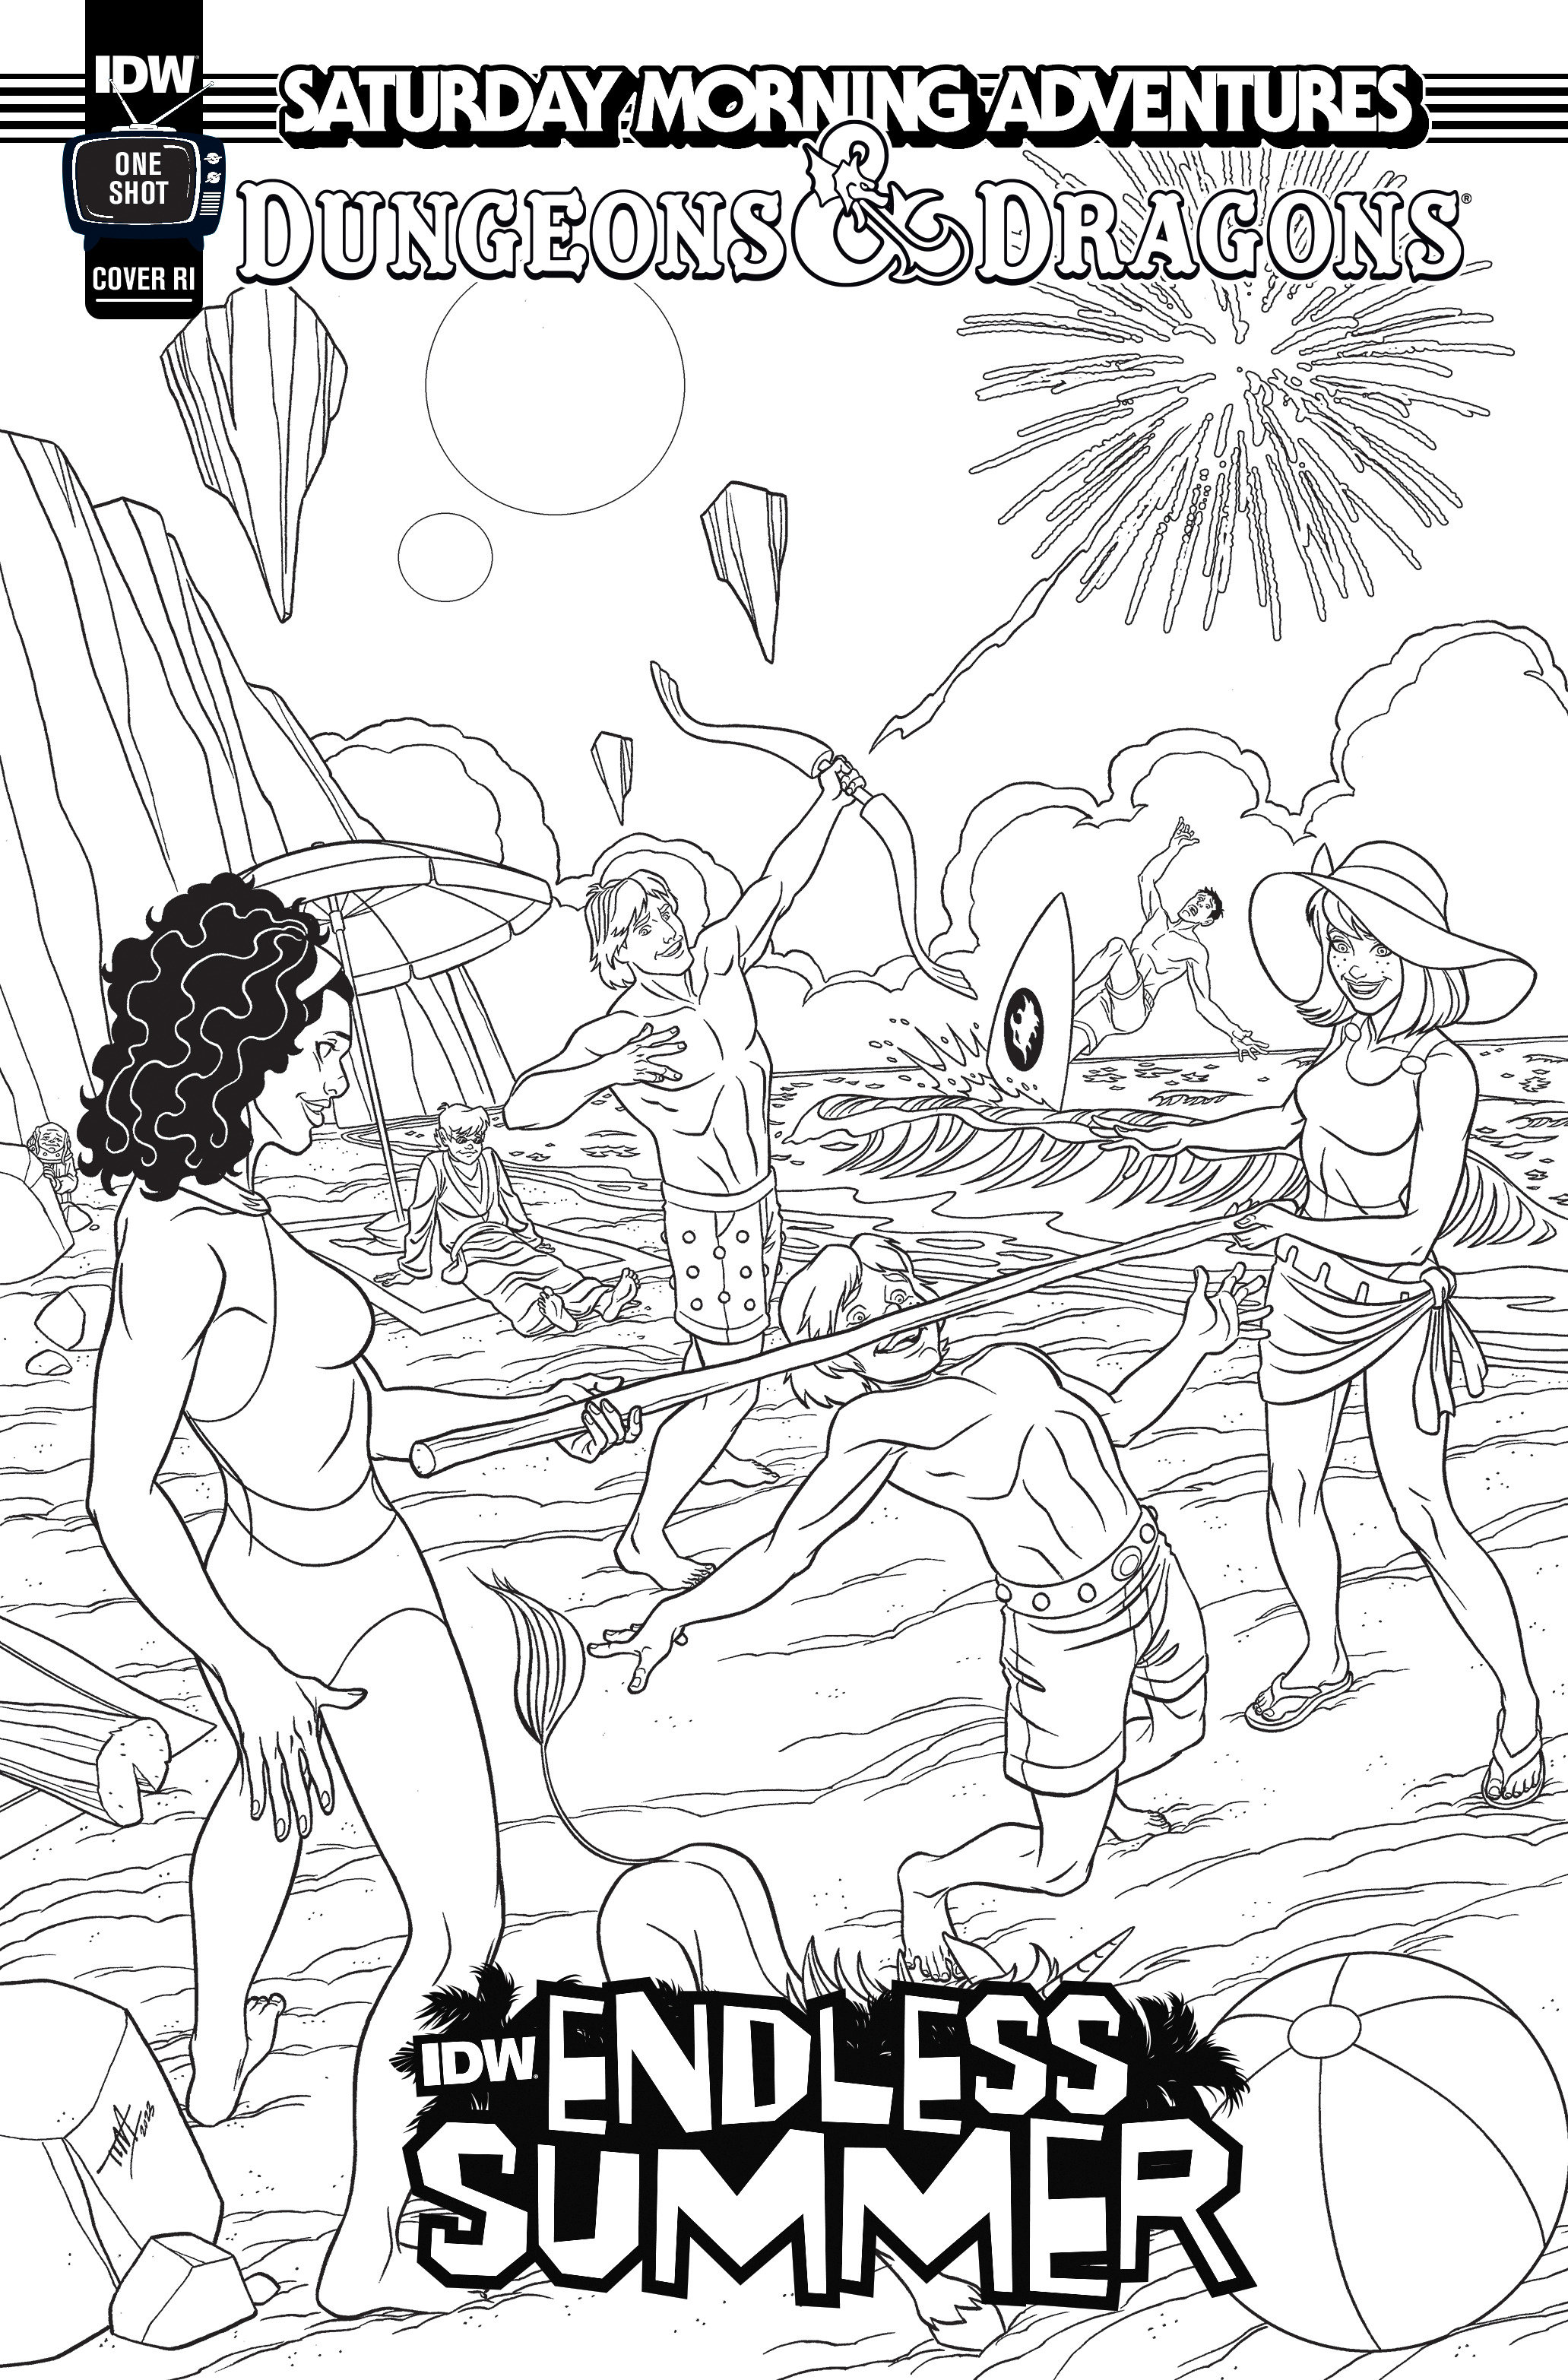 IDW Endless Summer—Dungeons & Dragons Saturday Morning Adventures Cover Retailer Incentive Coloring Book 1 For 10 Variant